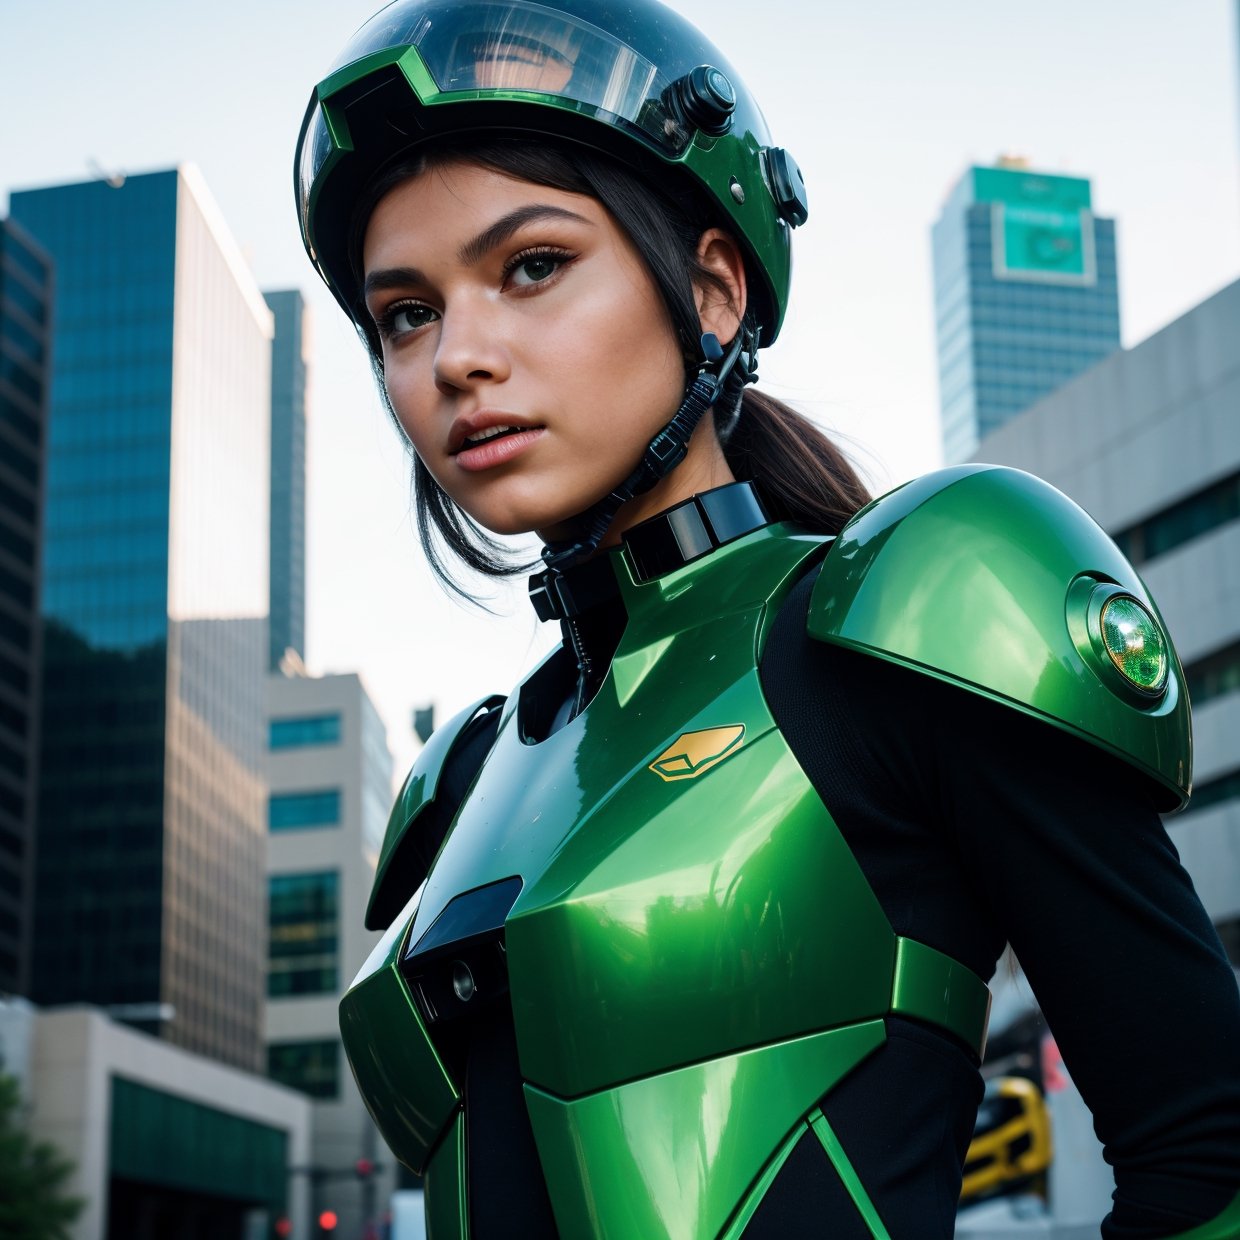 Highest image quality, outstanding details, ultra-high resolution, (realism: 1.4), the best illustration, favor details, highly condensed 1girl, with a delicate and beautiful face, dressed in a black and green mecha, wearing a mecha helmet, holding a directional controller, riding on a motorcycle, the background is a high-tech lighting scene of the future city.